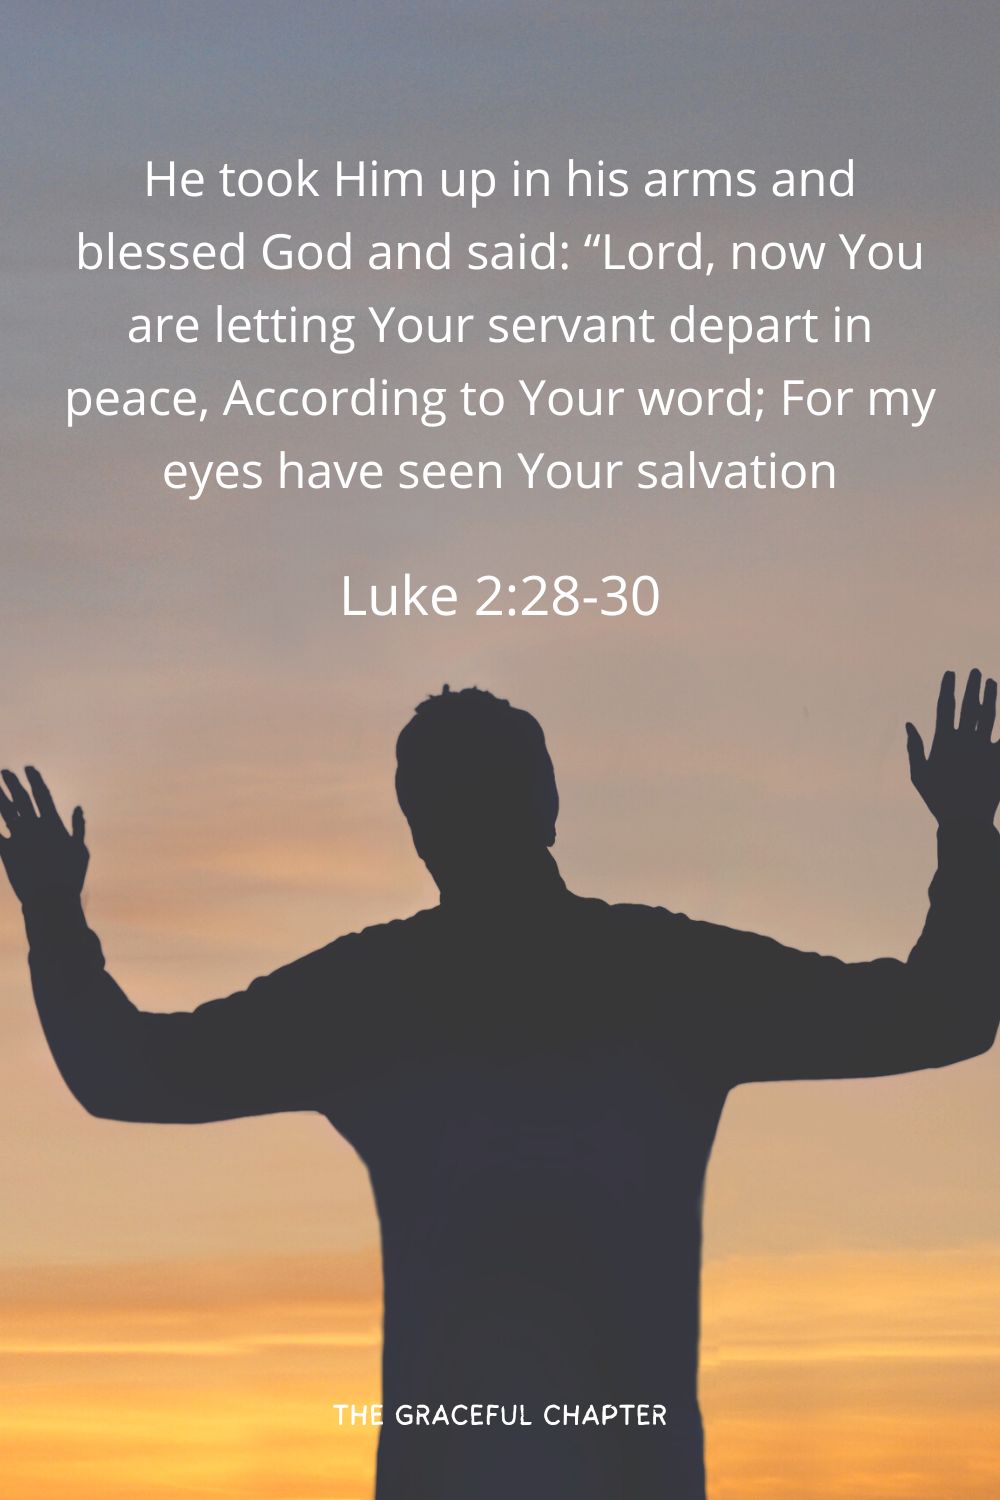 He took Him up in his arms and blessed God and said: “Lord, now You are letting Your servant depart in peace, According to Your word; For my eyes have seen Your salvation